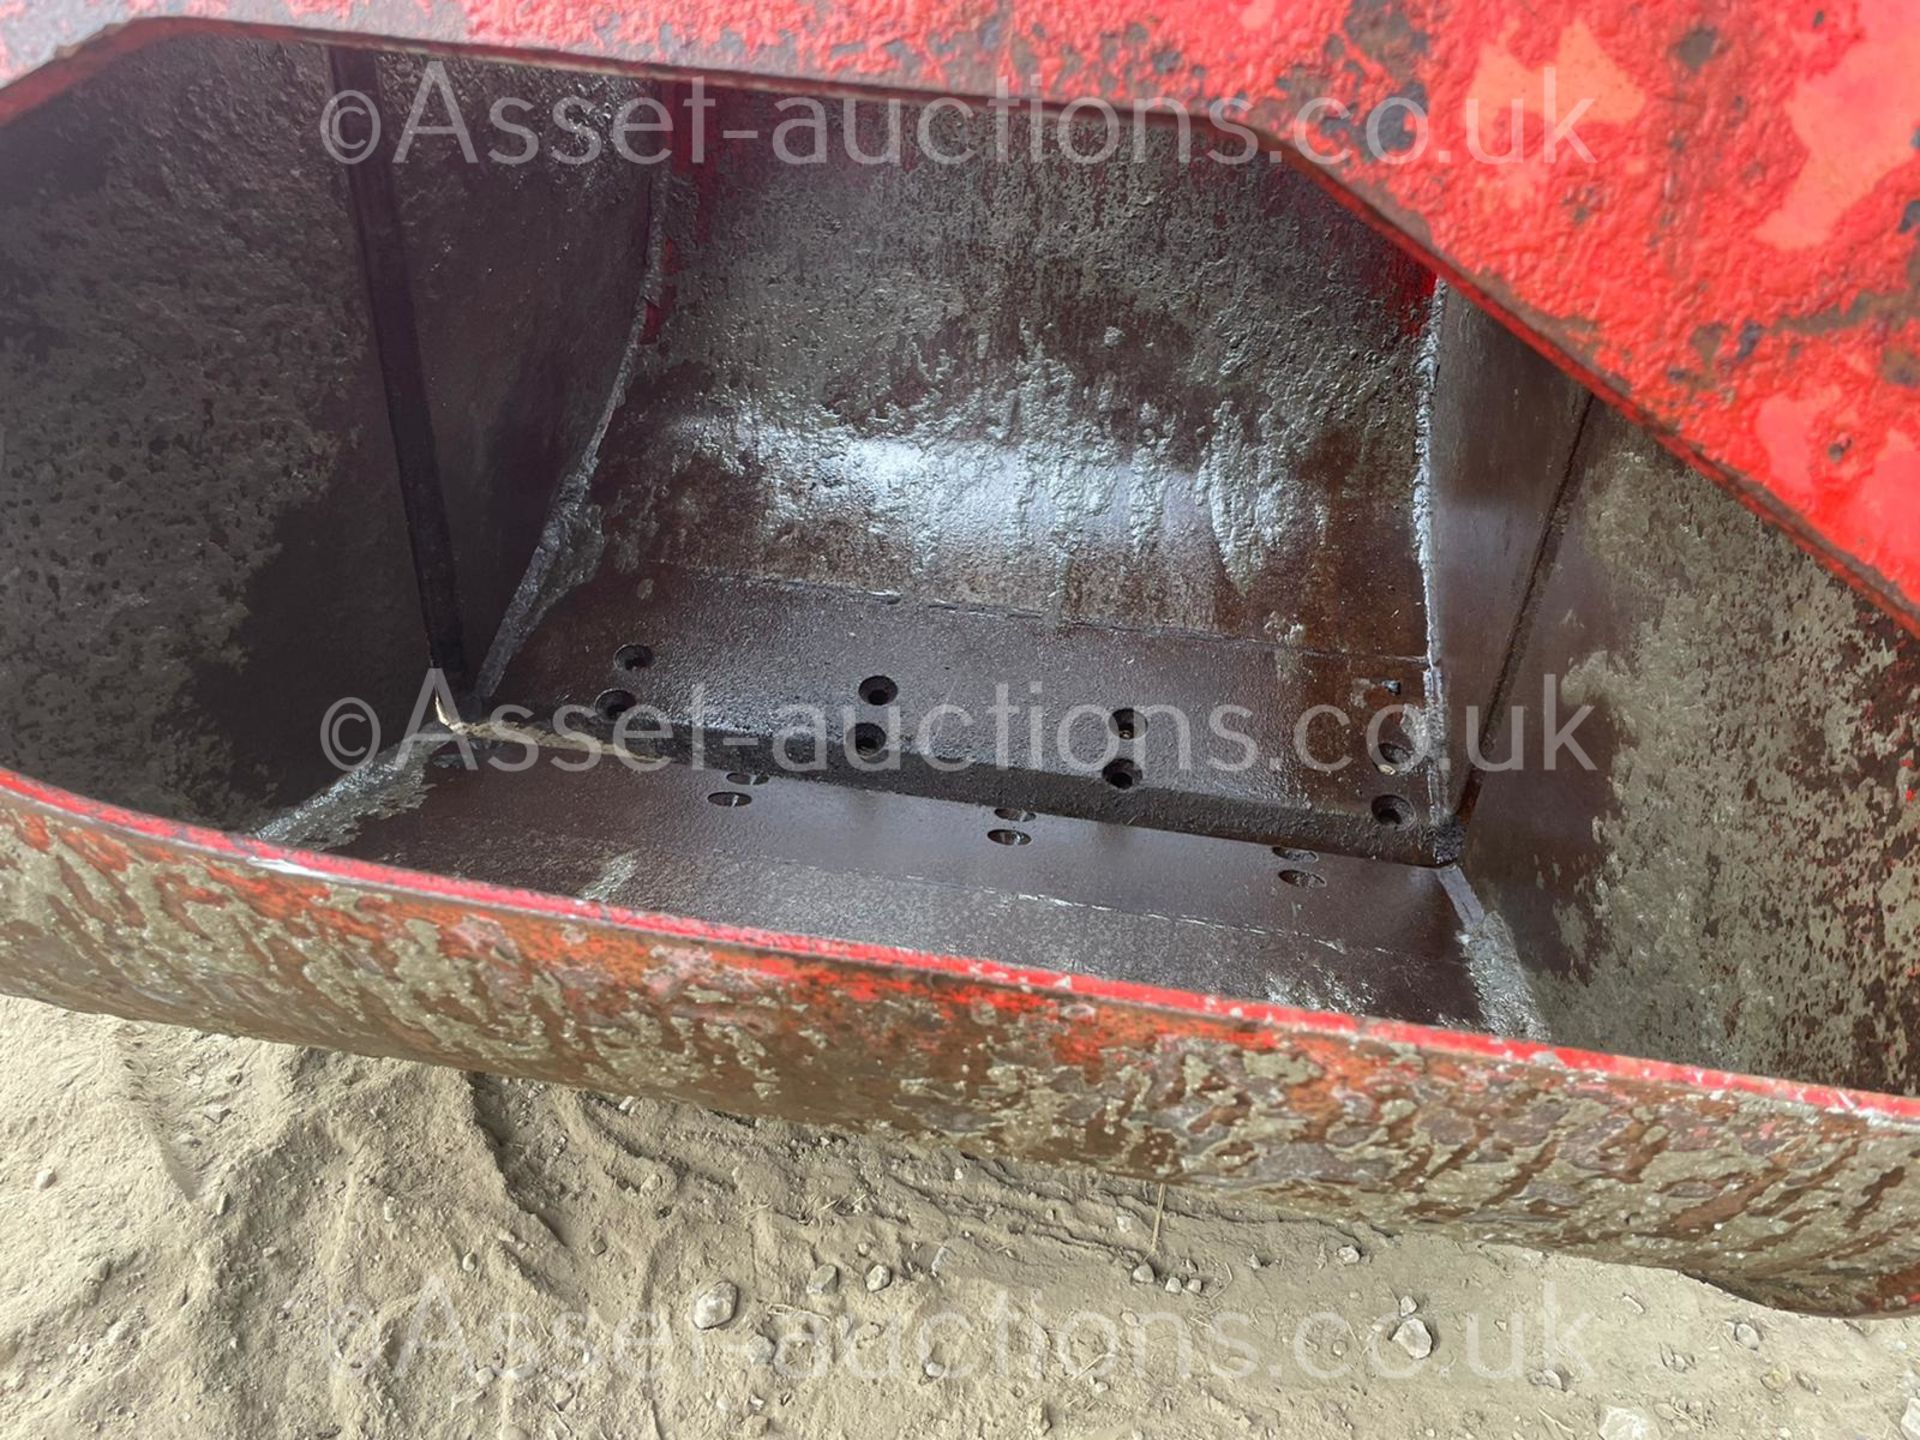 HYDRAULIC RED SHELL GRAB, SUITABLE FOR A LARGE EXCAVATOR, HYDRAULIC DRIVEN, 65mm PINS *PLUS VAT* - Image 13 of 16